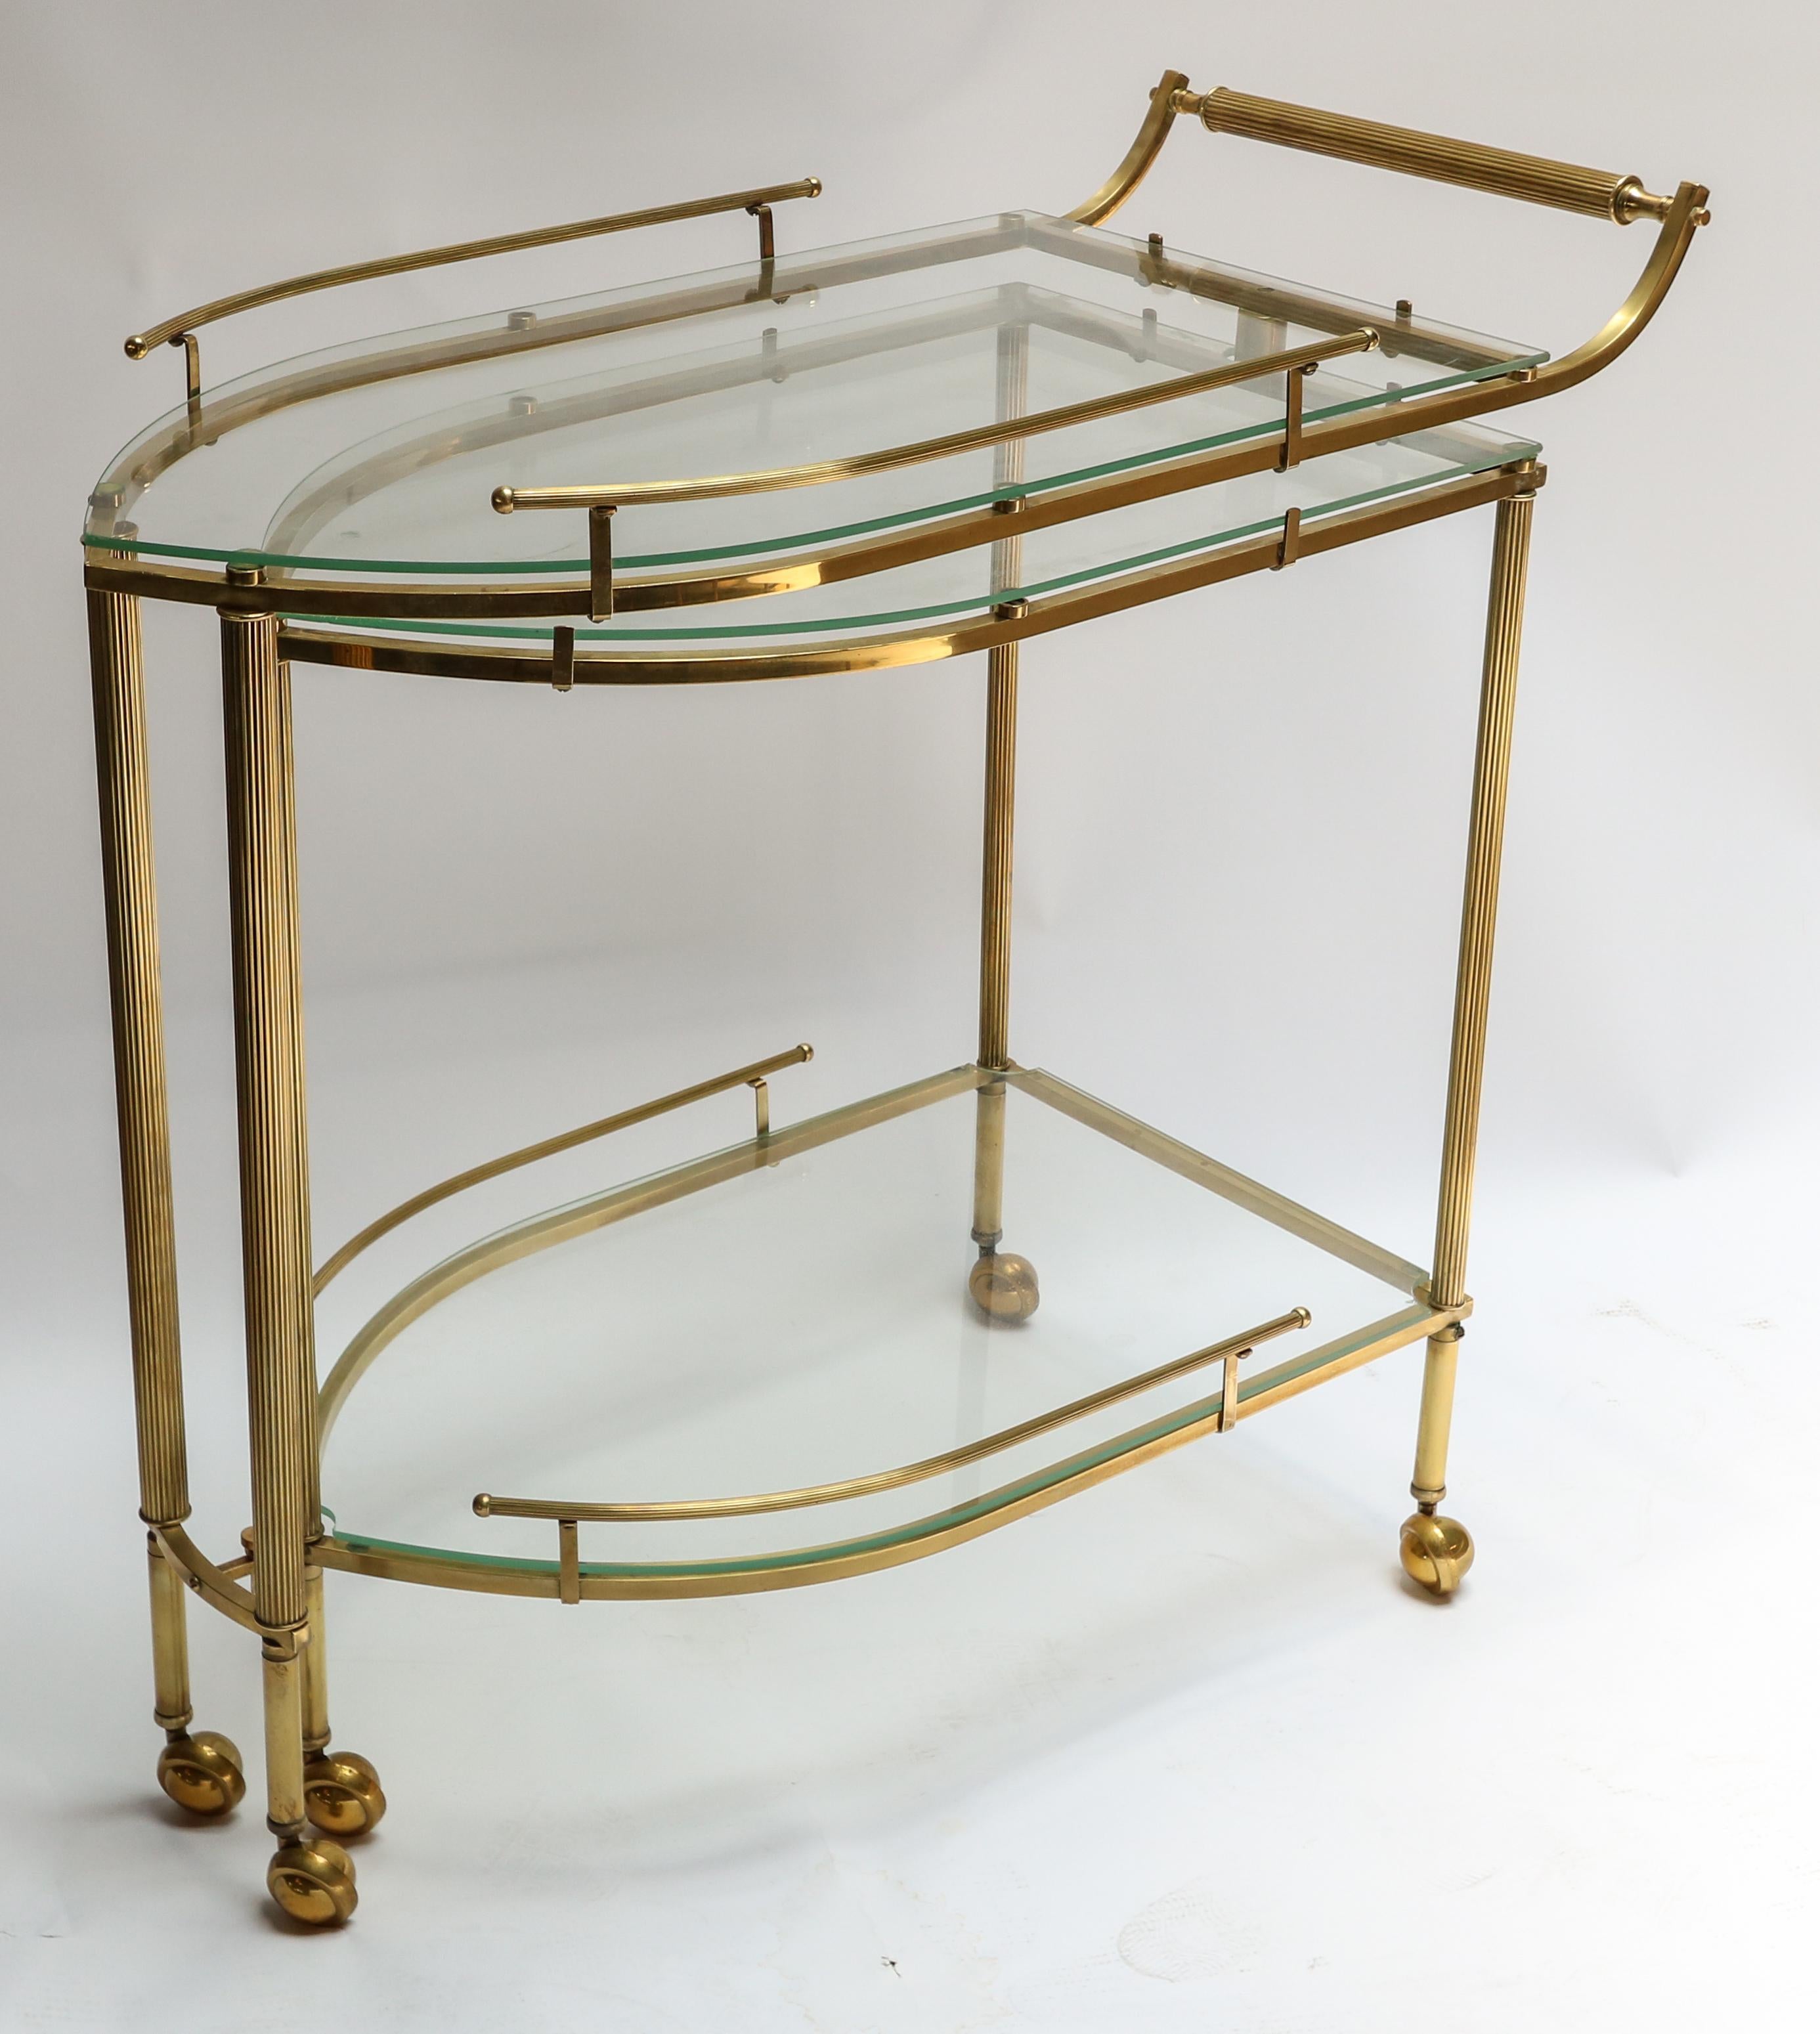 Italian brass bar cart from the 1960s with three glass shelves, fluted legs and ball wheels. The bottom section swings out to provide access to the lower upper shelf.